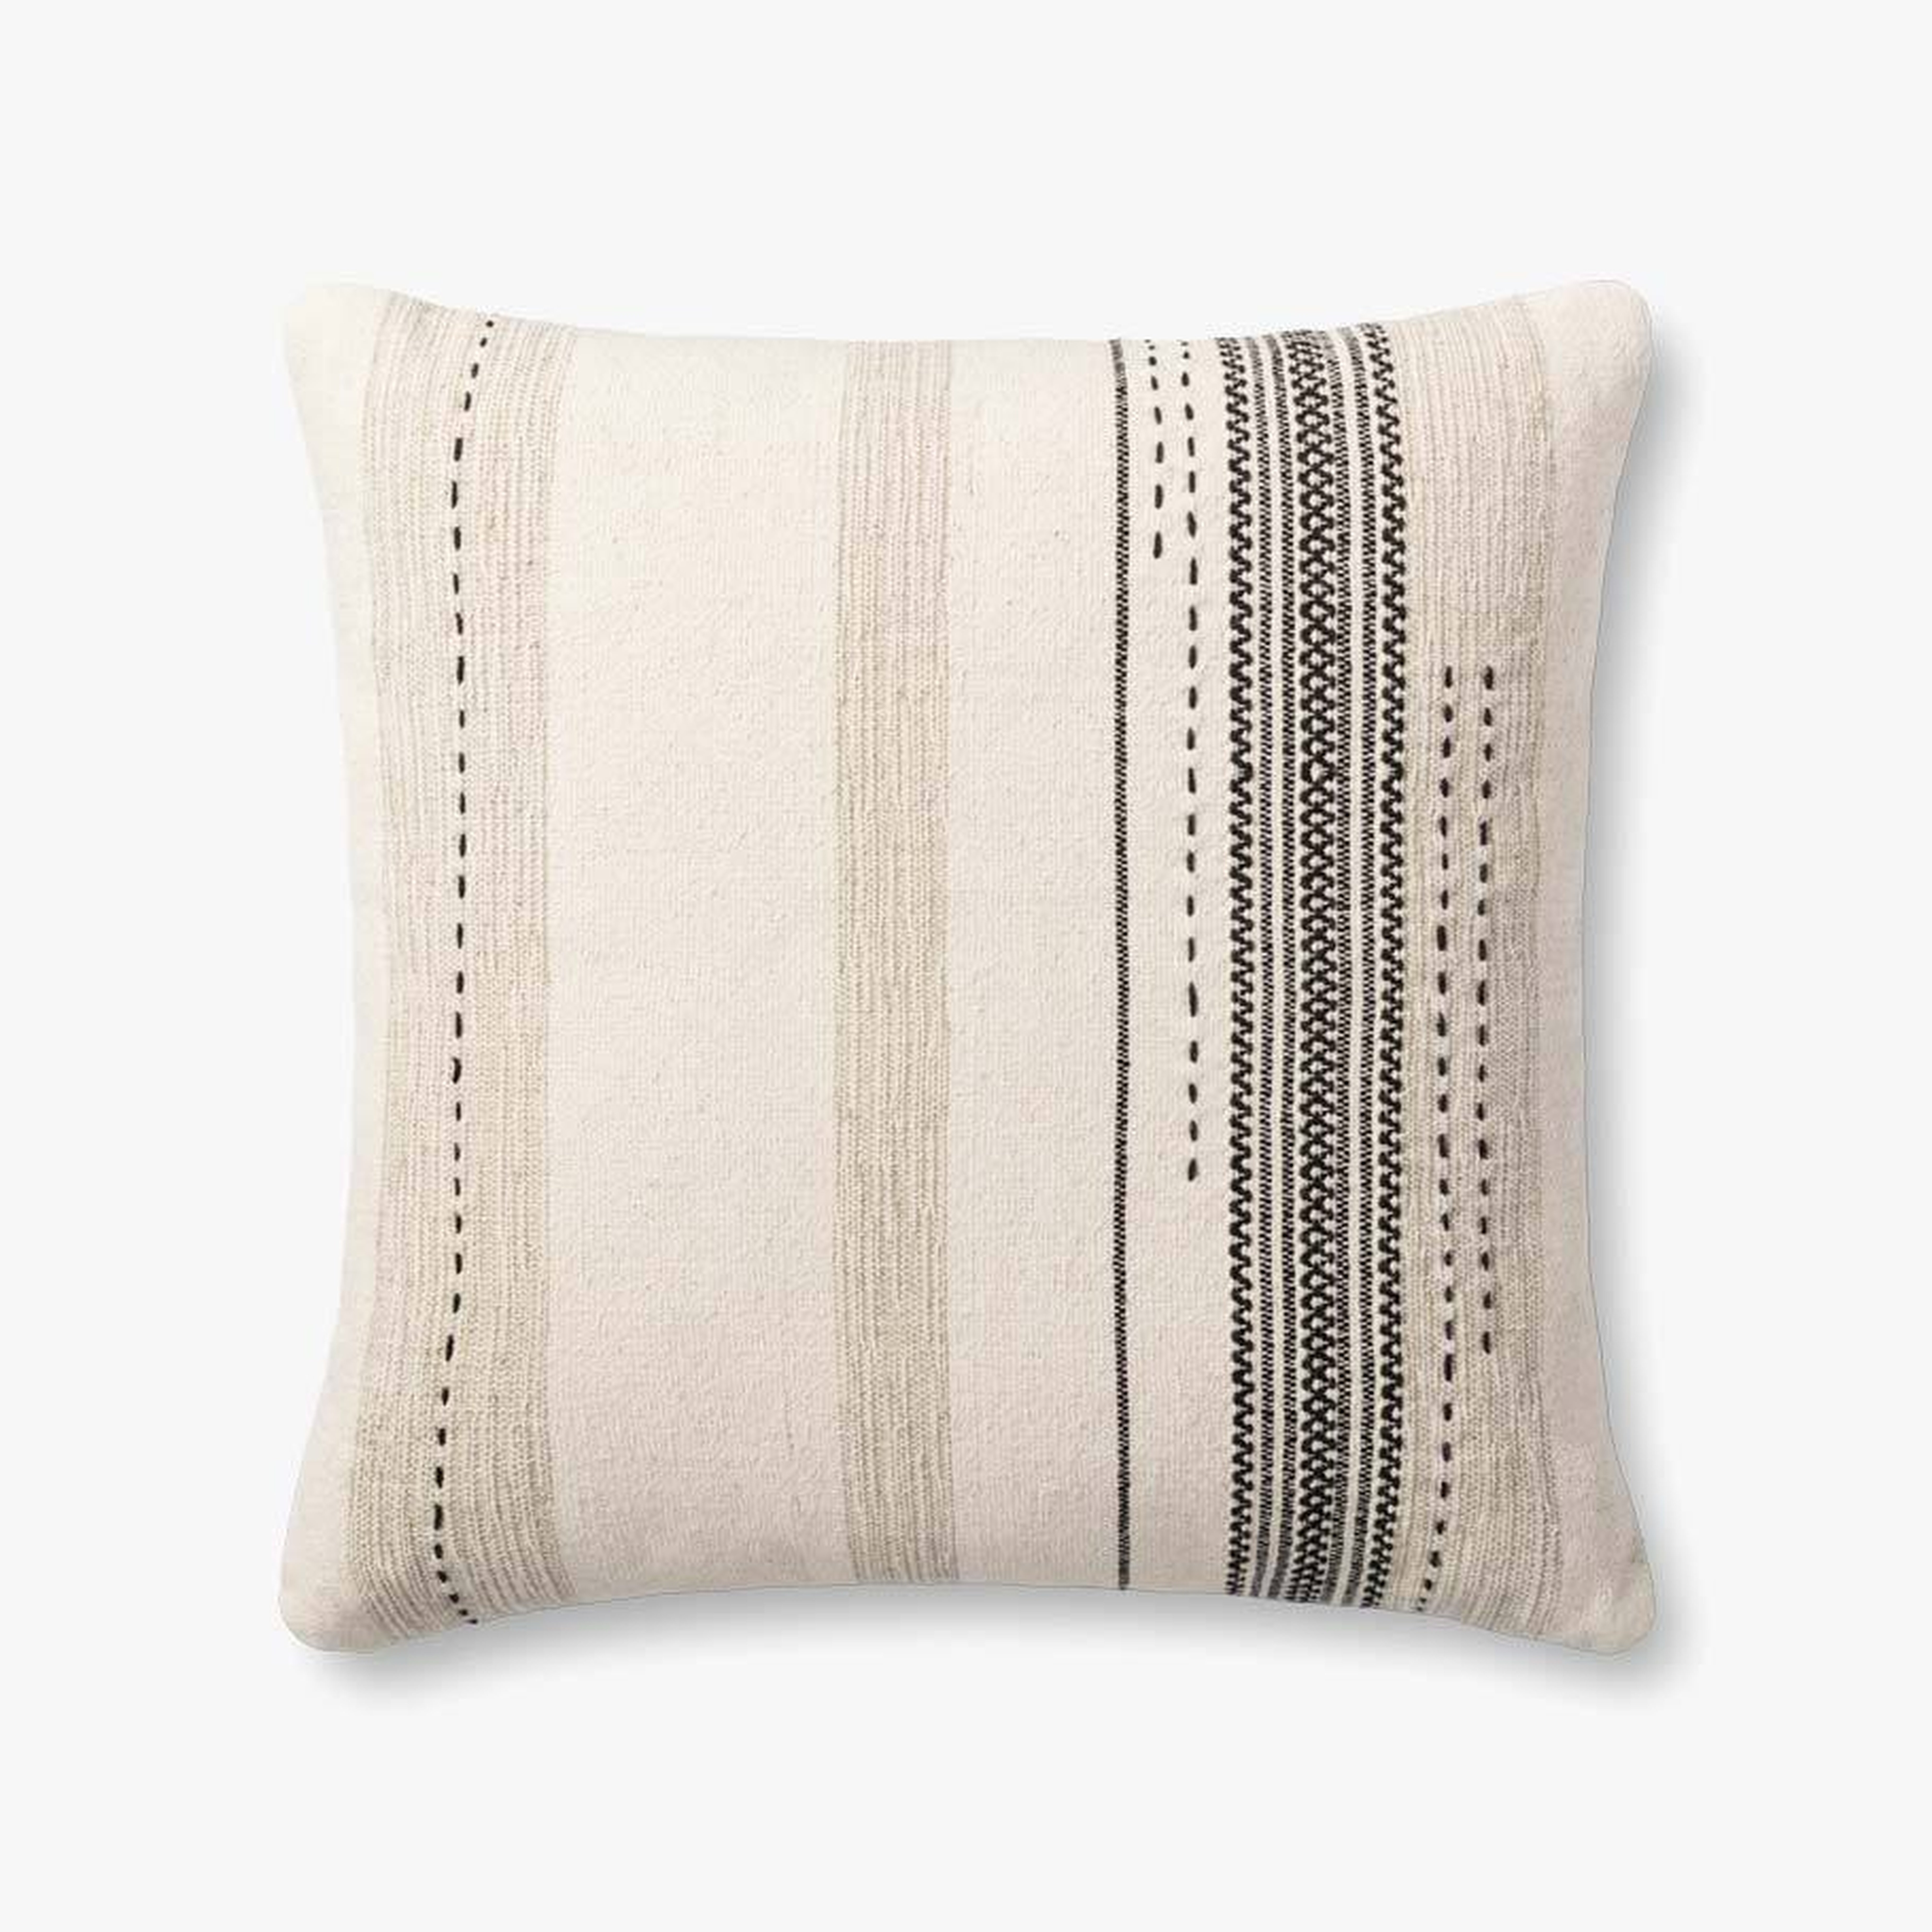 Stitched Embroidered Throw Pillow Cover, 22" x 22" - Loma Threads